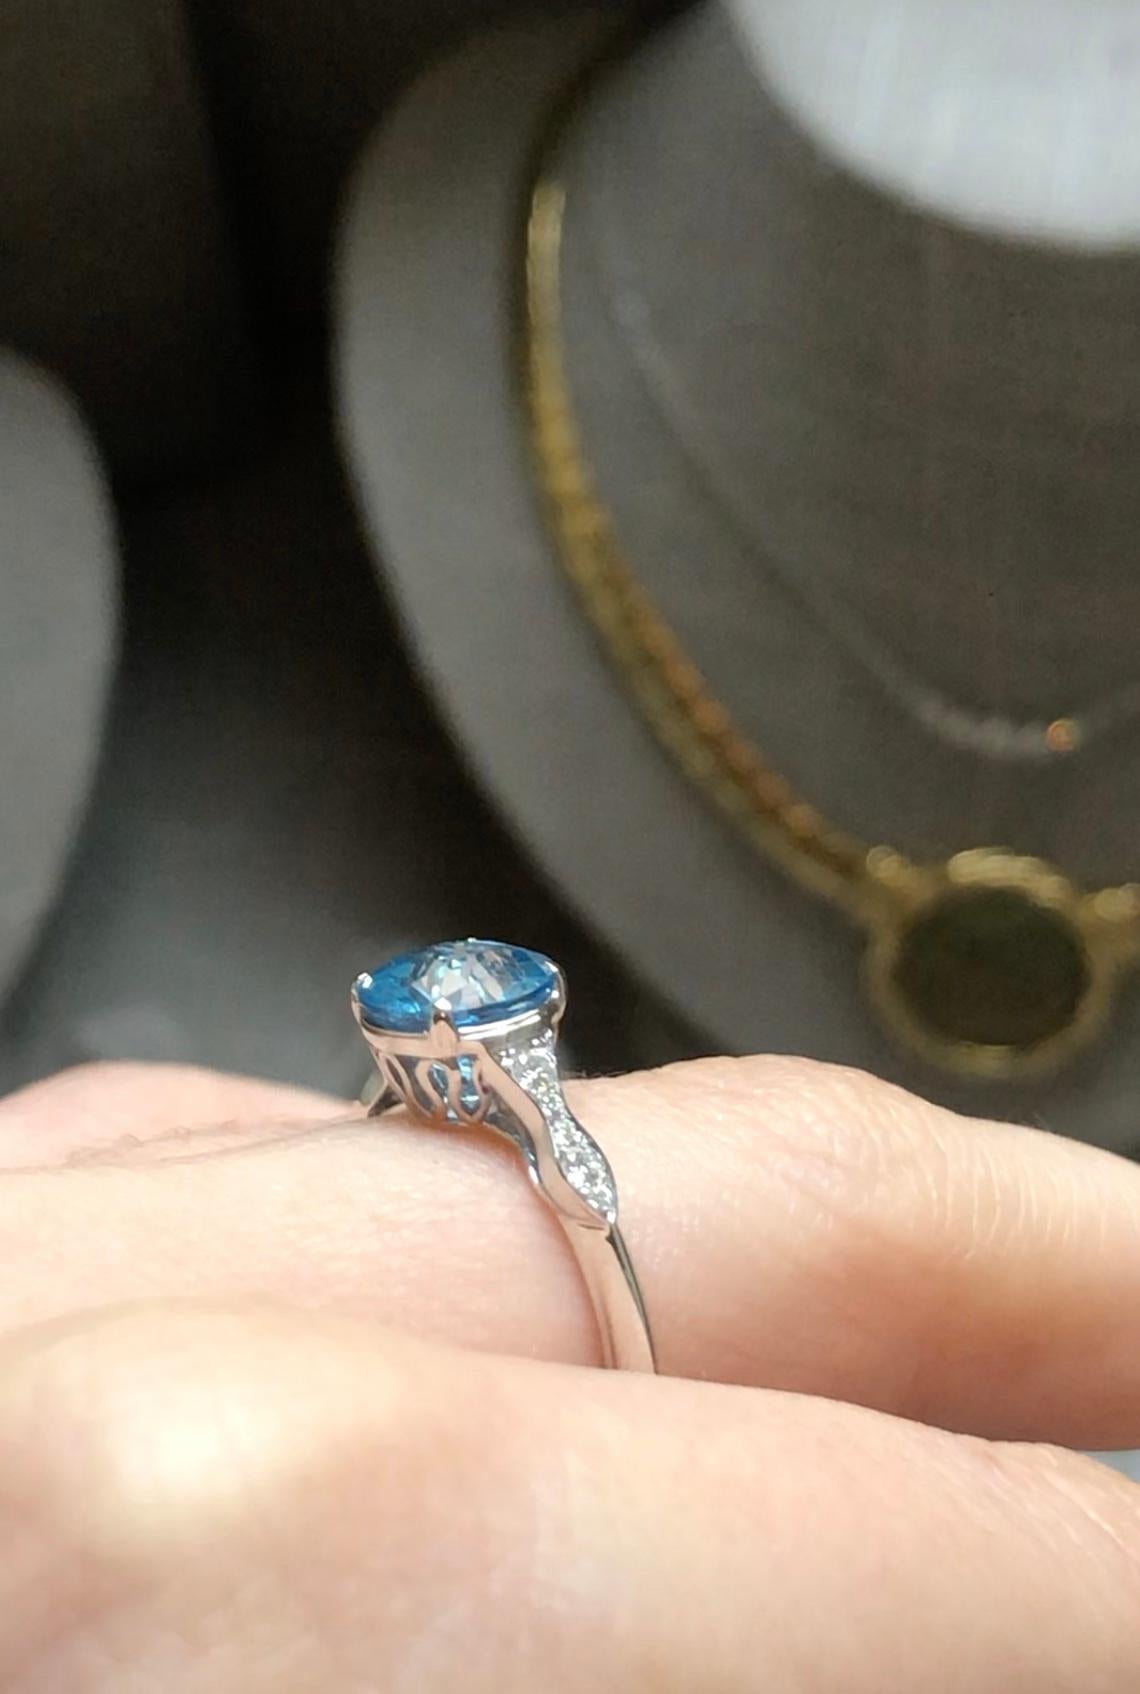 For Sale:  14k White Gold Diamond Engagement Ring with 2.36 Carat Round Blue Topaz 4